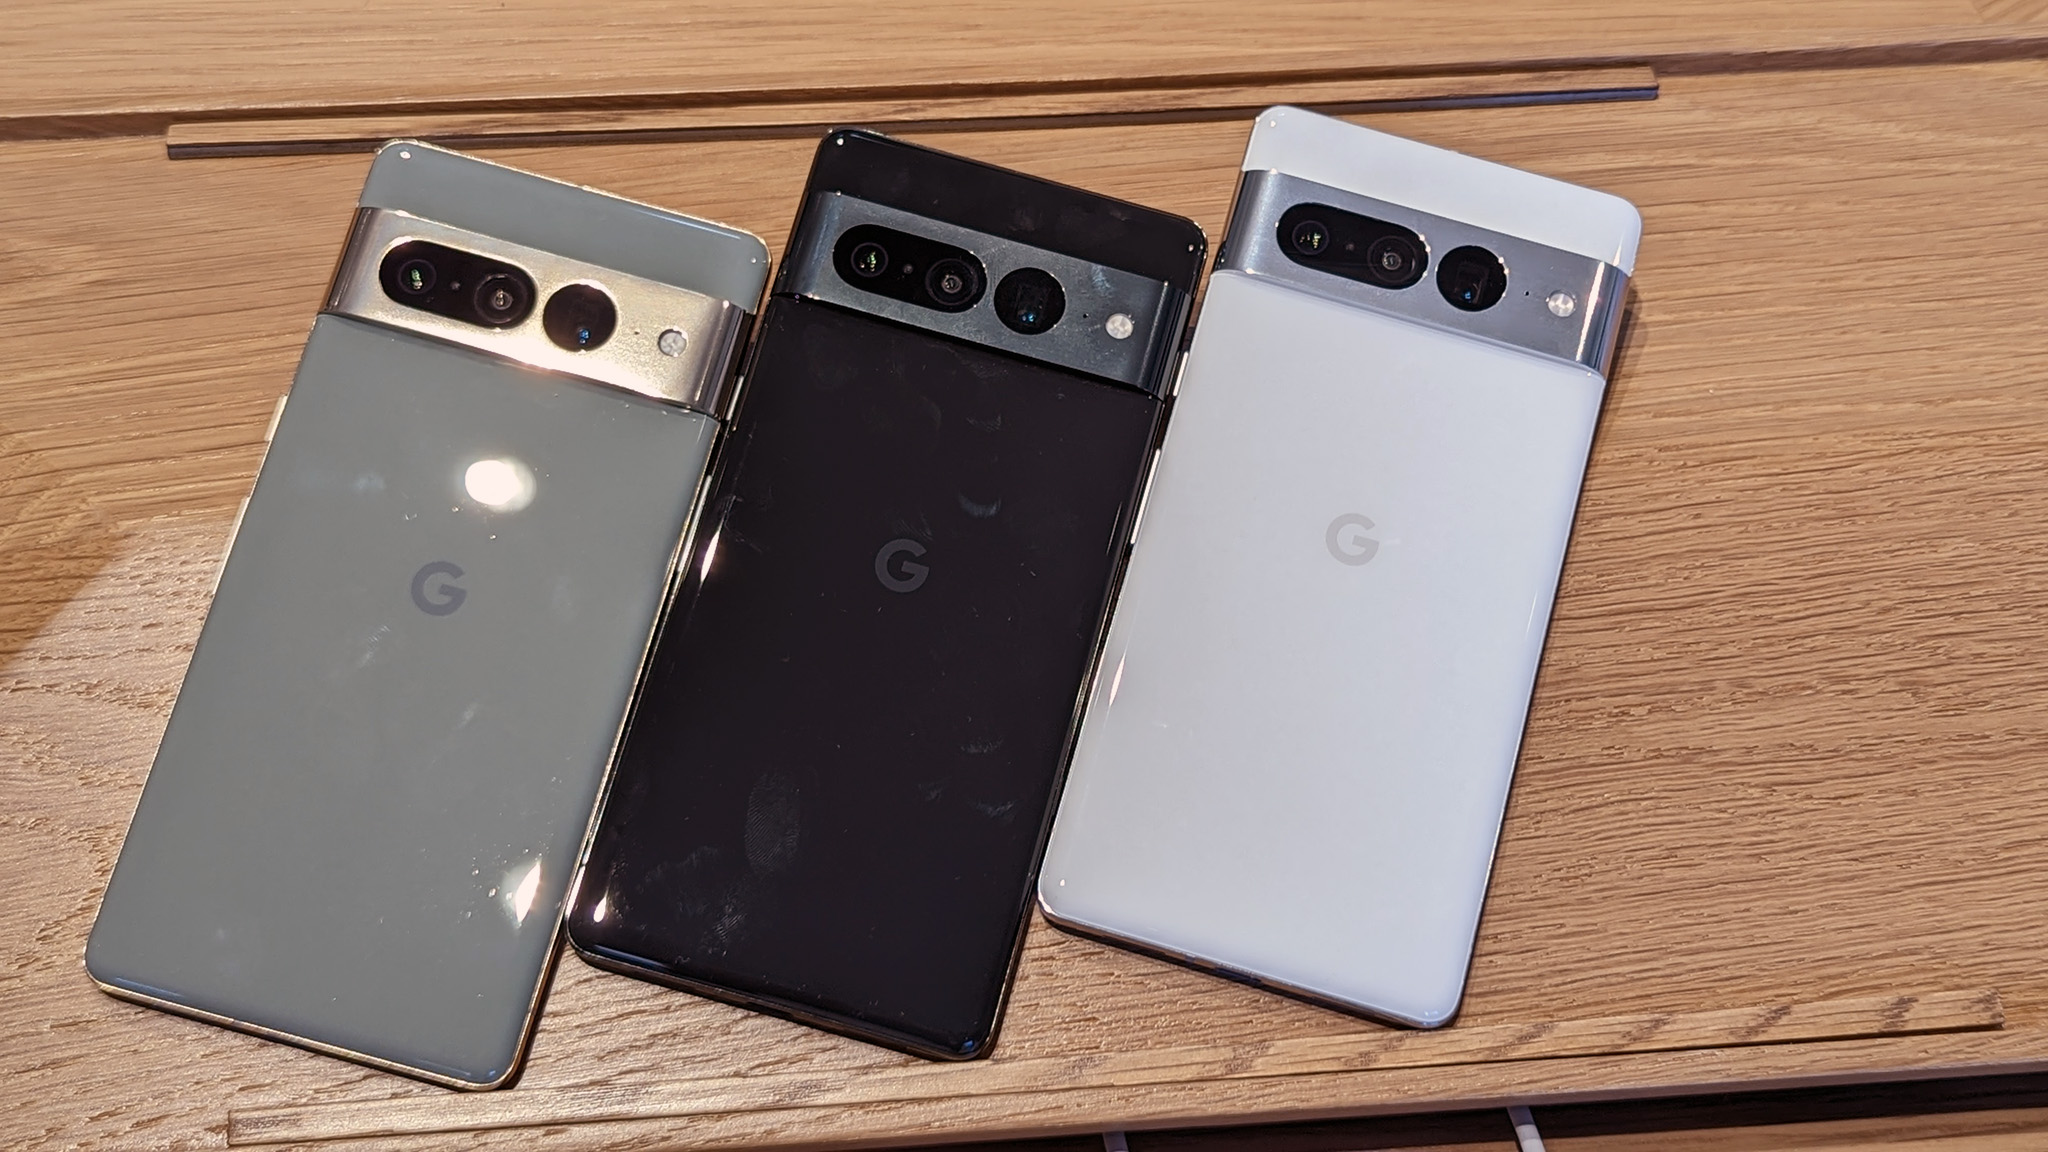 Taking a look at the Google Pixel 7 Pro at Google's Fall 2022 event